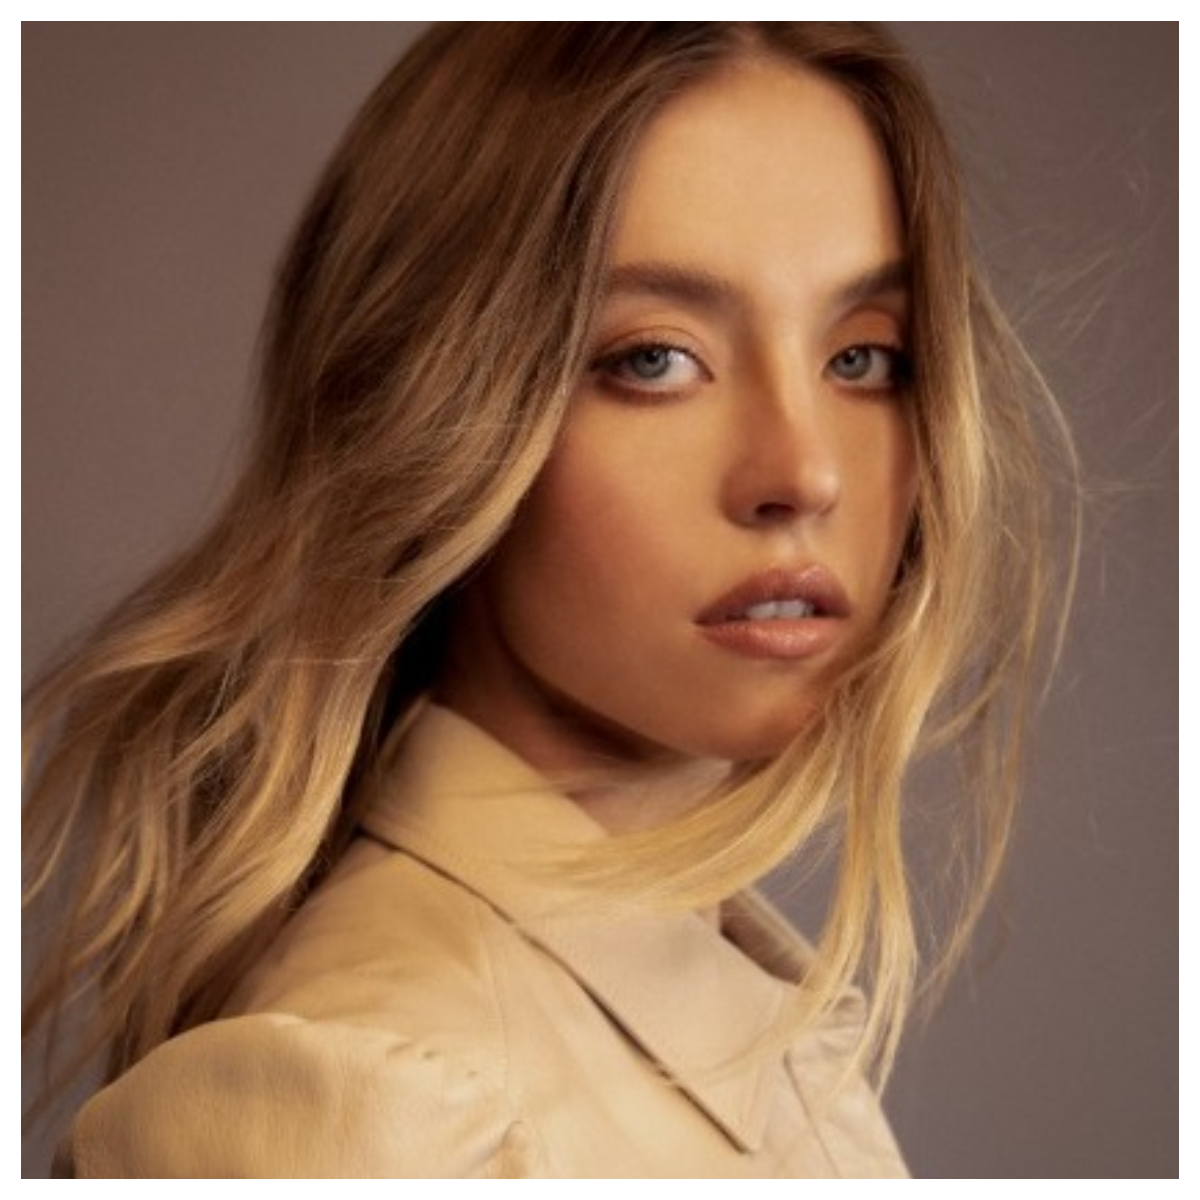 10 most popular movies and TV shows starring Sydney Sweeney